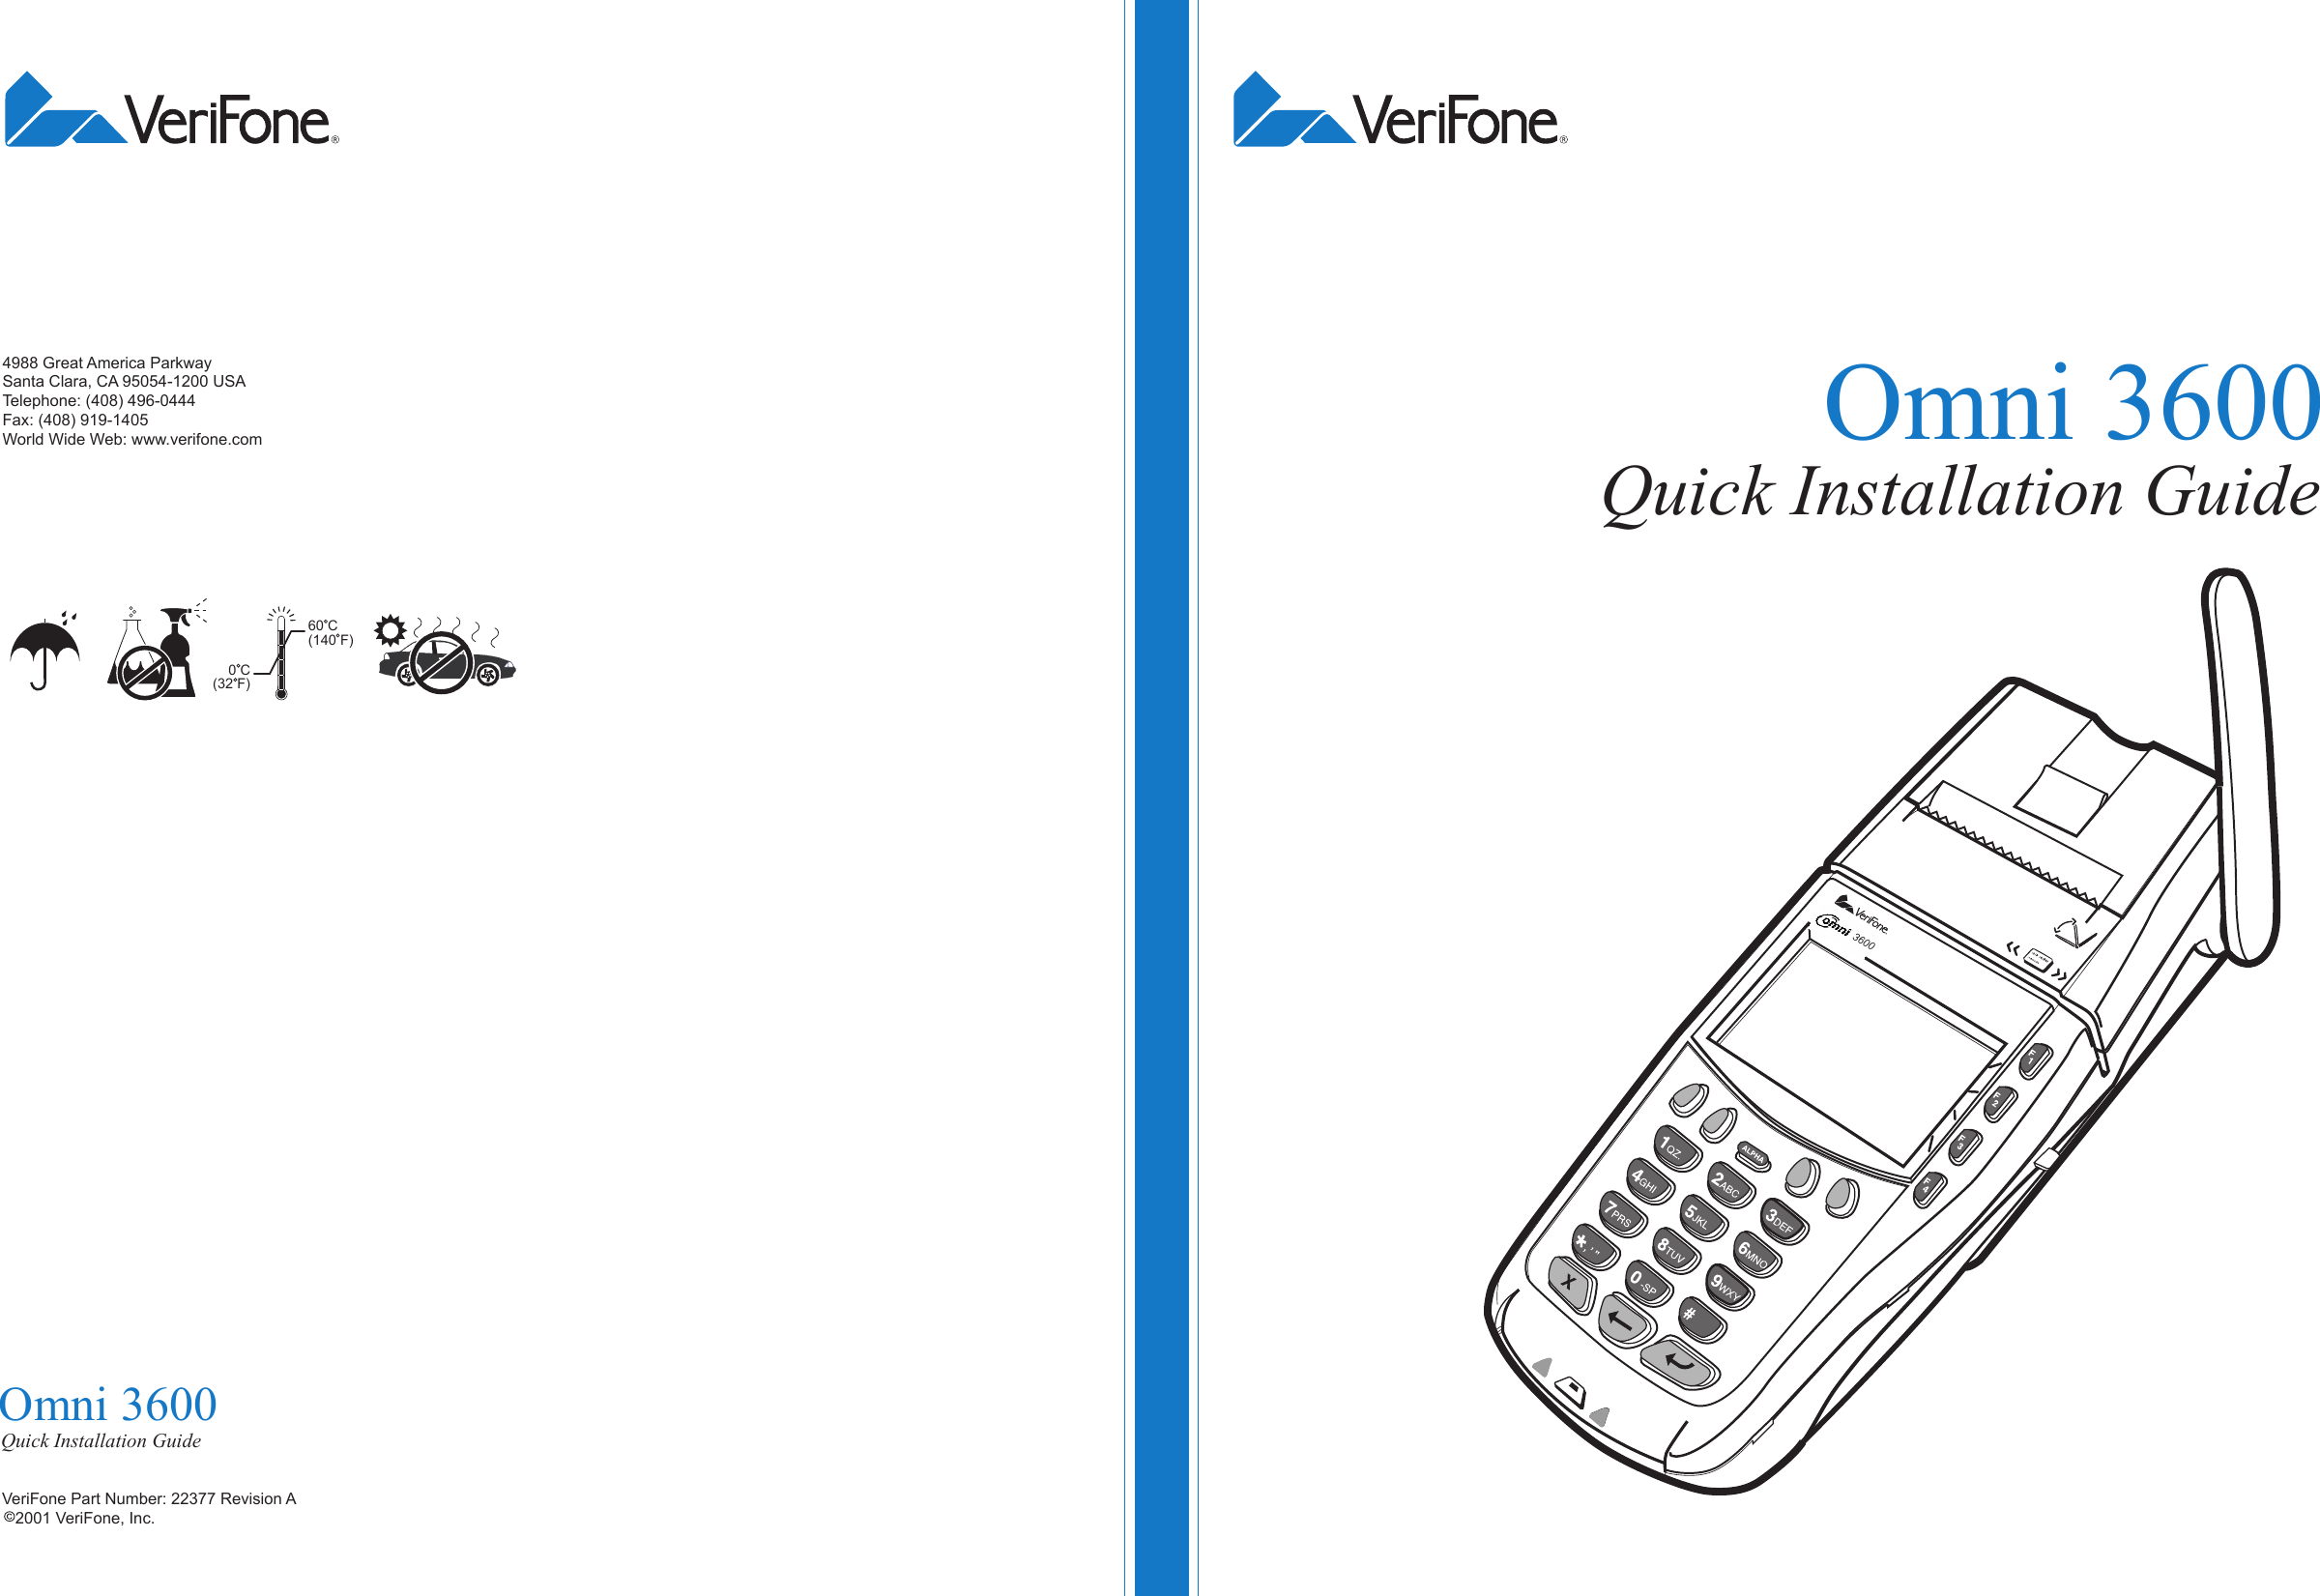 Omni 3600Quick Installation GuideVeriFone Part Number: 22377 Revision A   2001 VeriFone, Inc.4988 Great America ParkwaySanta Clara, CA 95054-1200 USATelephone: (408) 496-0444Fax: (408) 919-1405World Wide Web: www.verifone.com Quick Installation GuideOmni 360060 C(140 F)0 C(32 F)3600